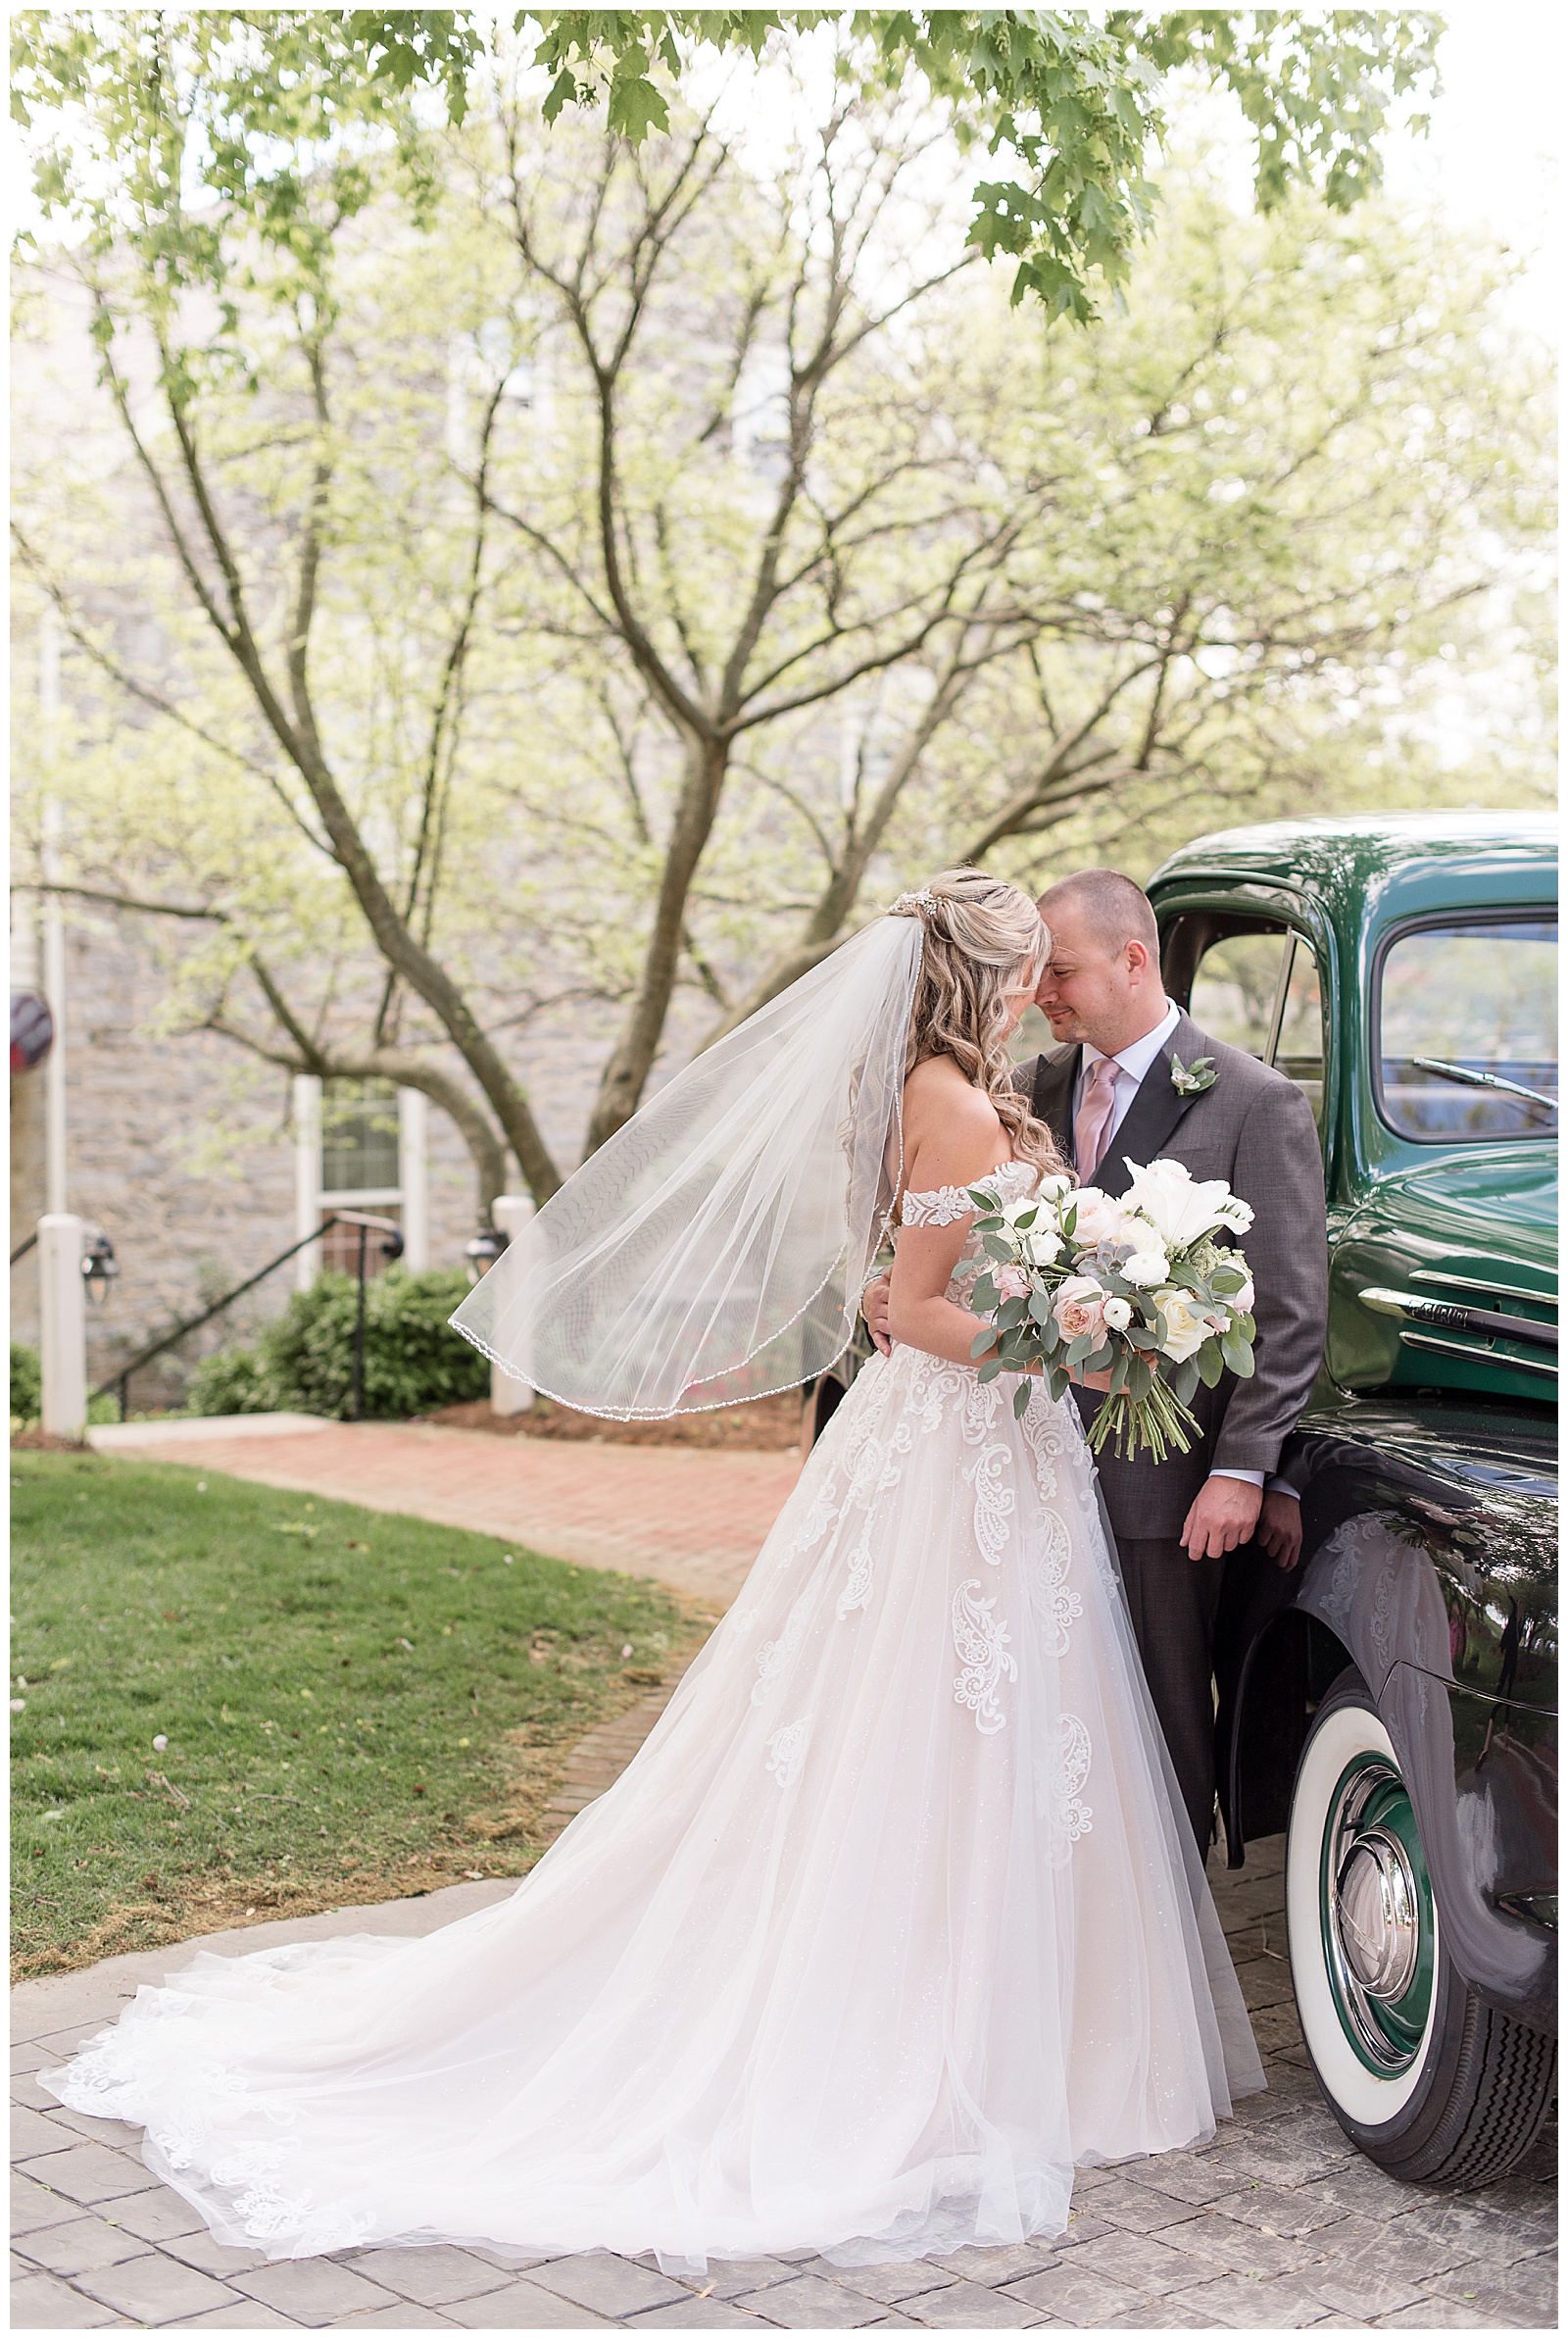 bride's white train displayed behind her as she rests her forehead against groom's forehead beside vintage truck in lancaster pennsylvania